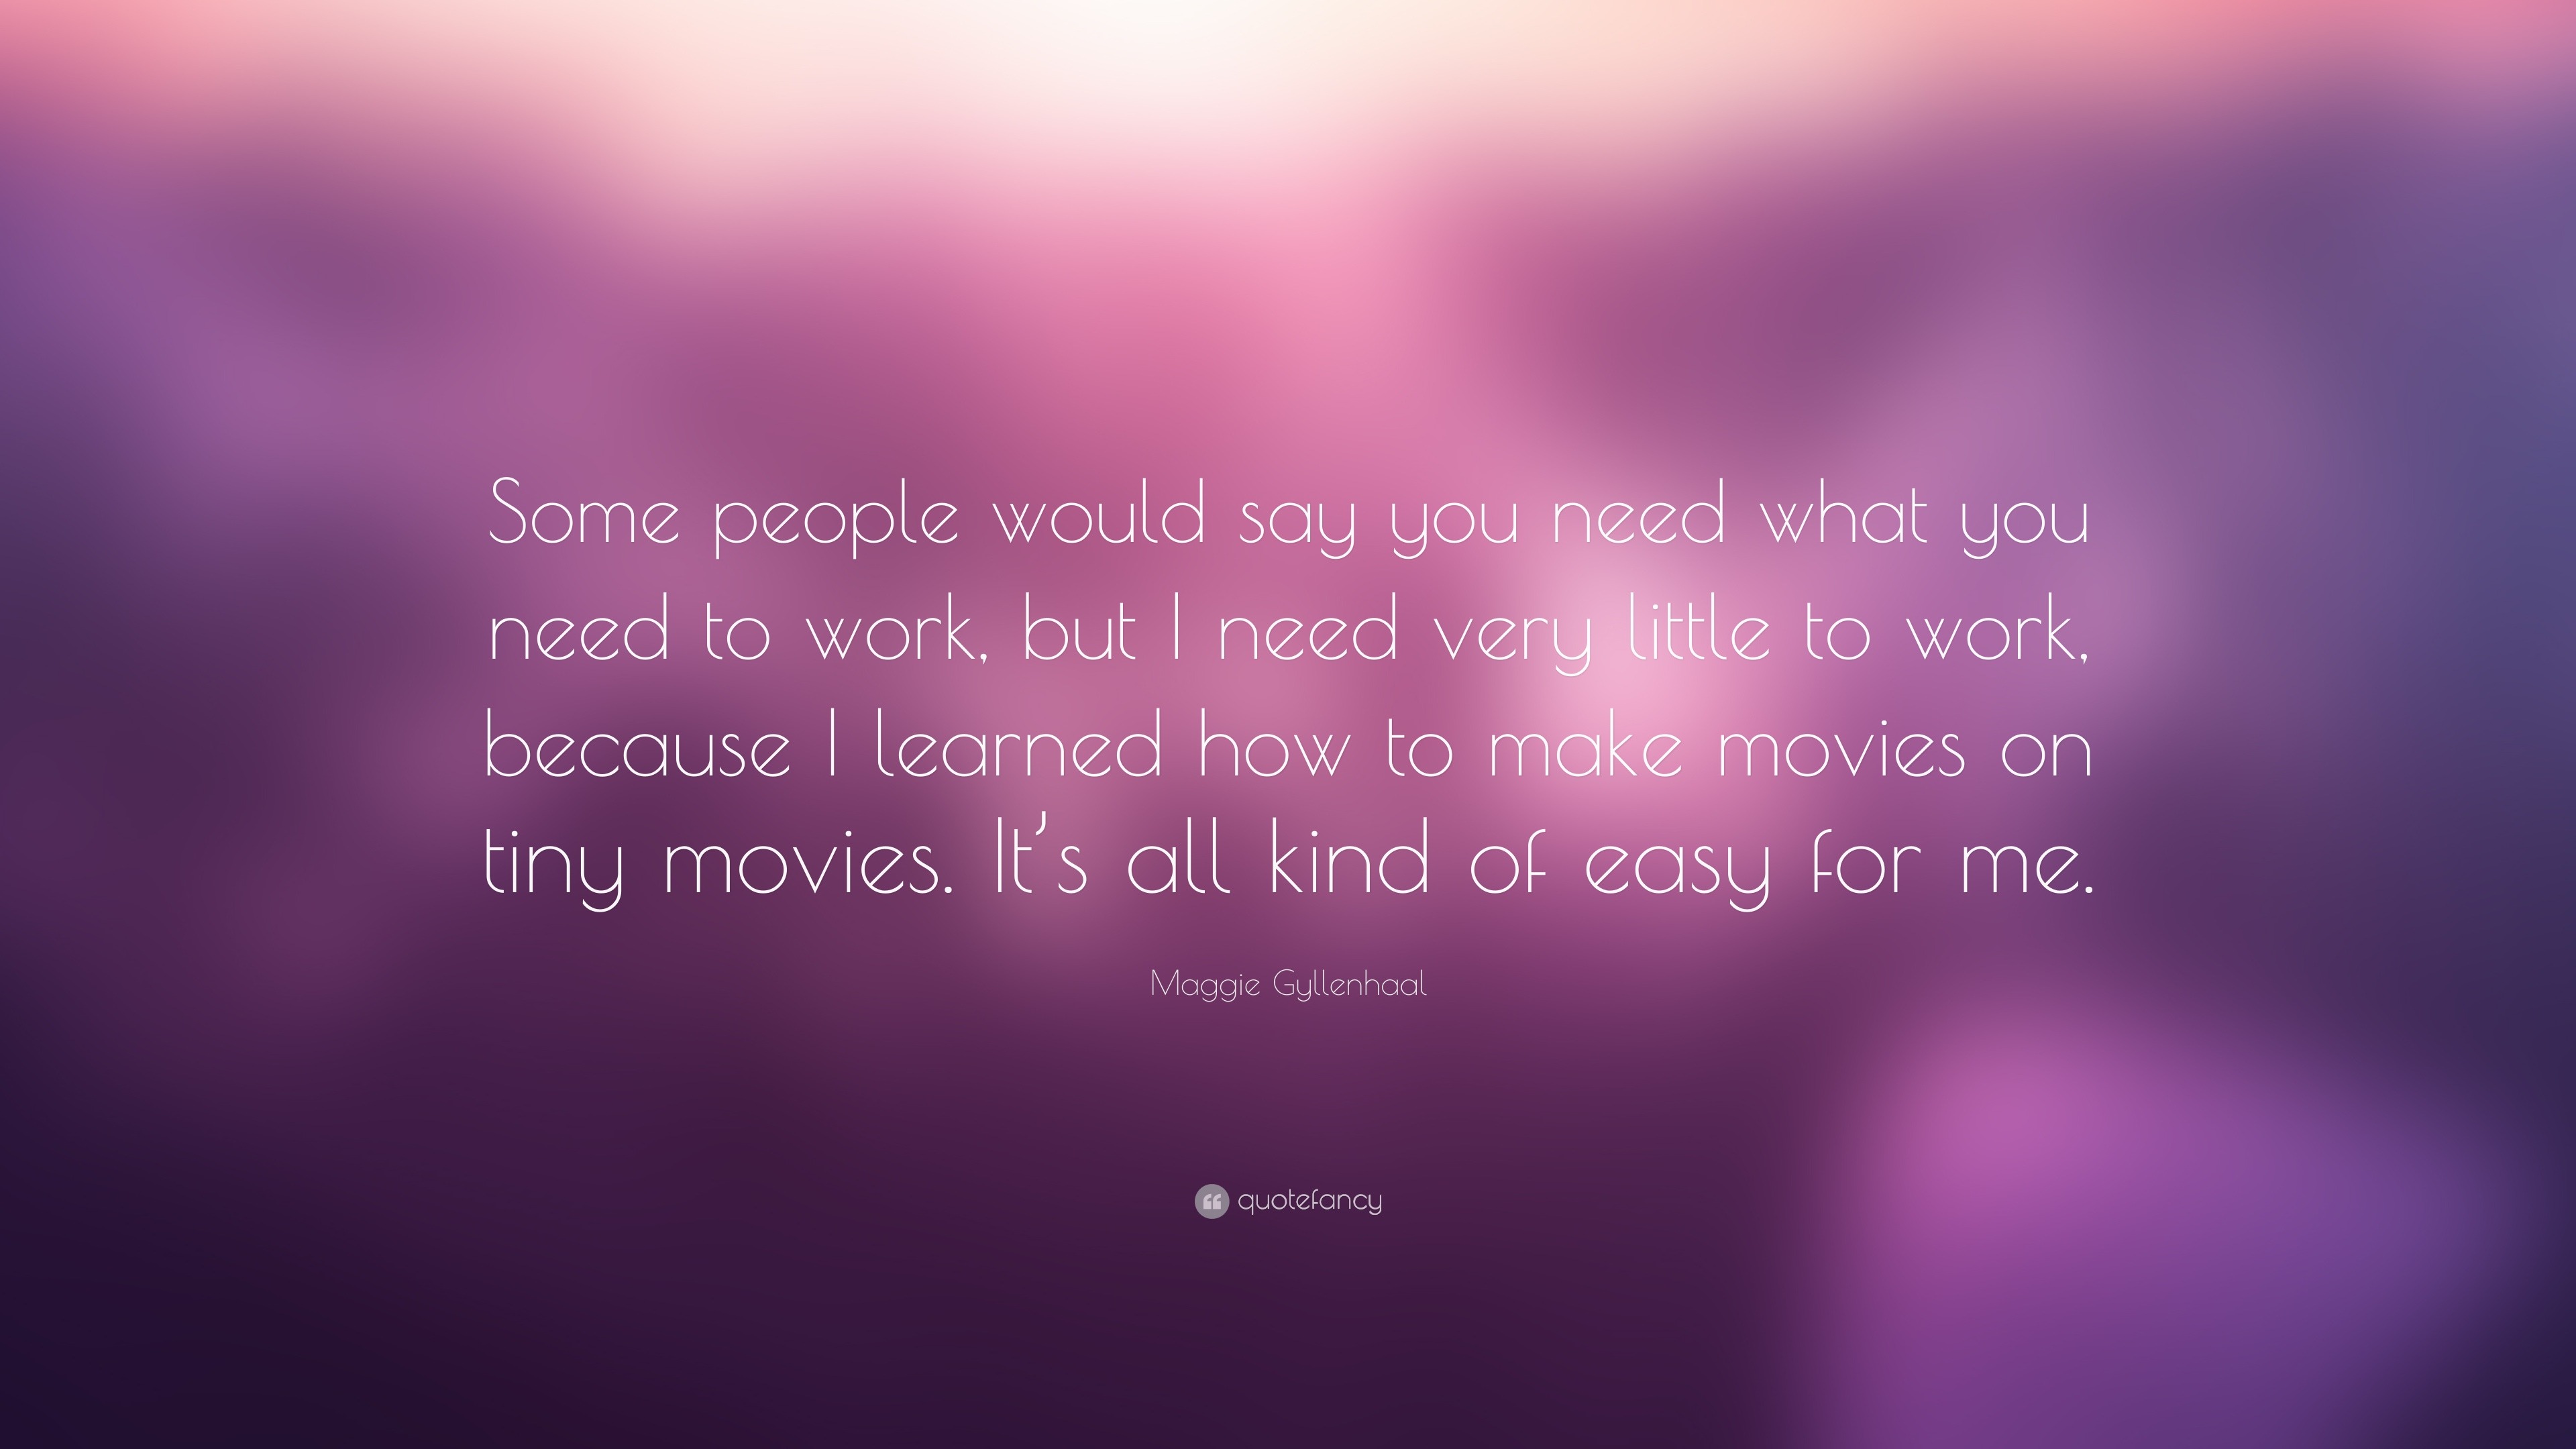 Maggie Gyllenhaal Quote: “Some people would say you need what you need to  work, but I need very little to work, because I learned how to make movi...”